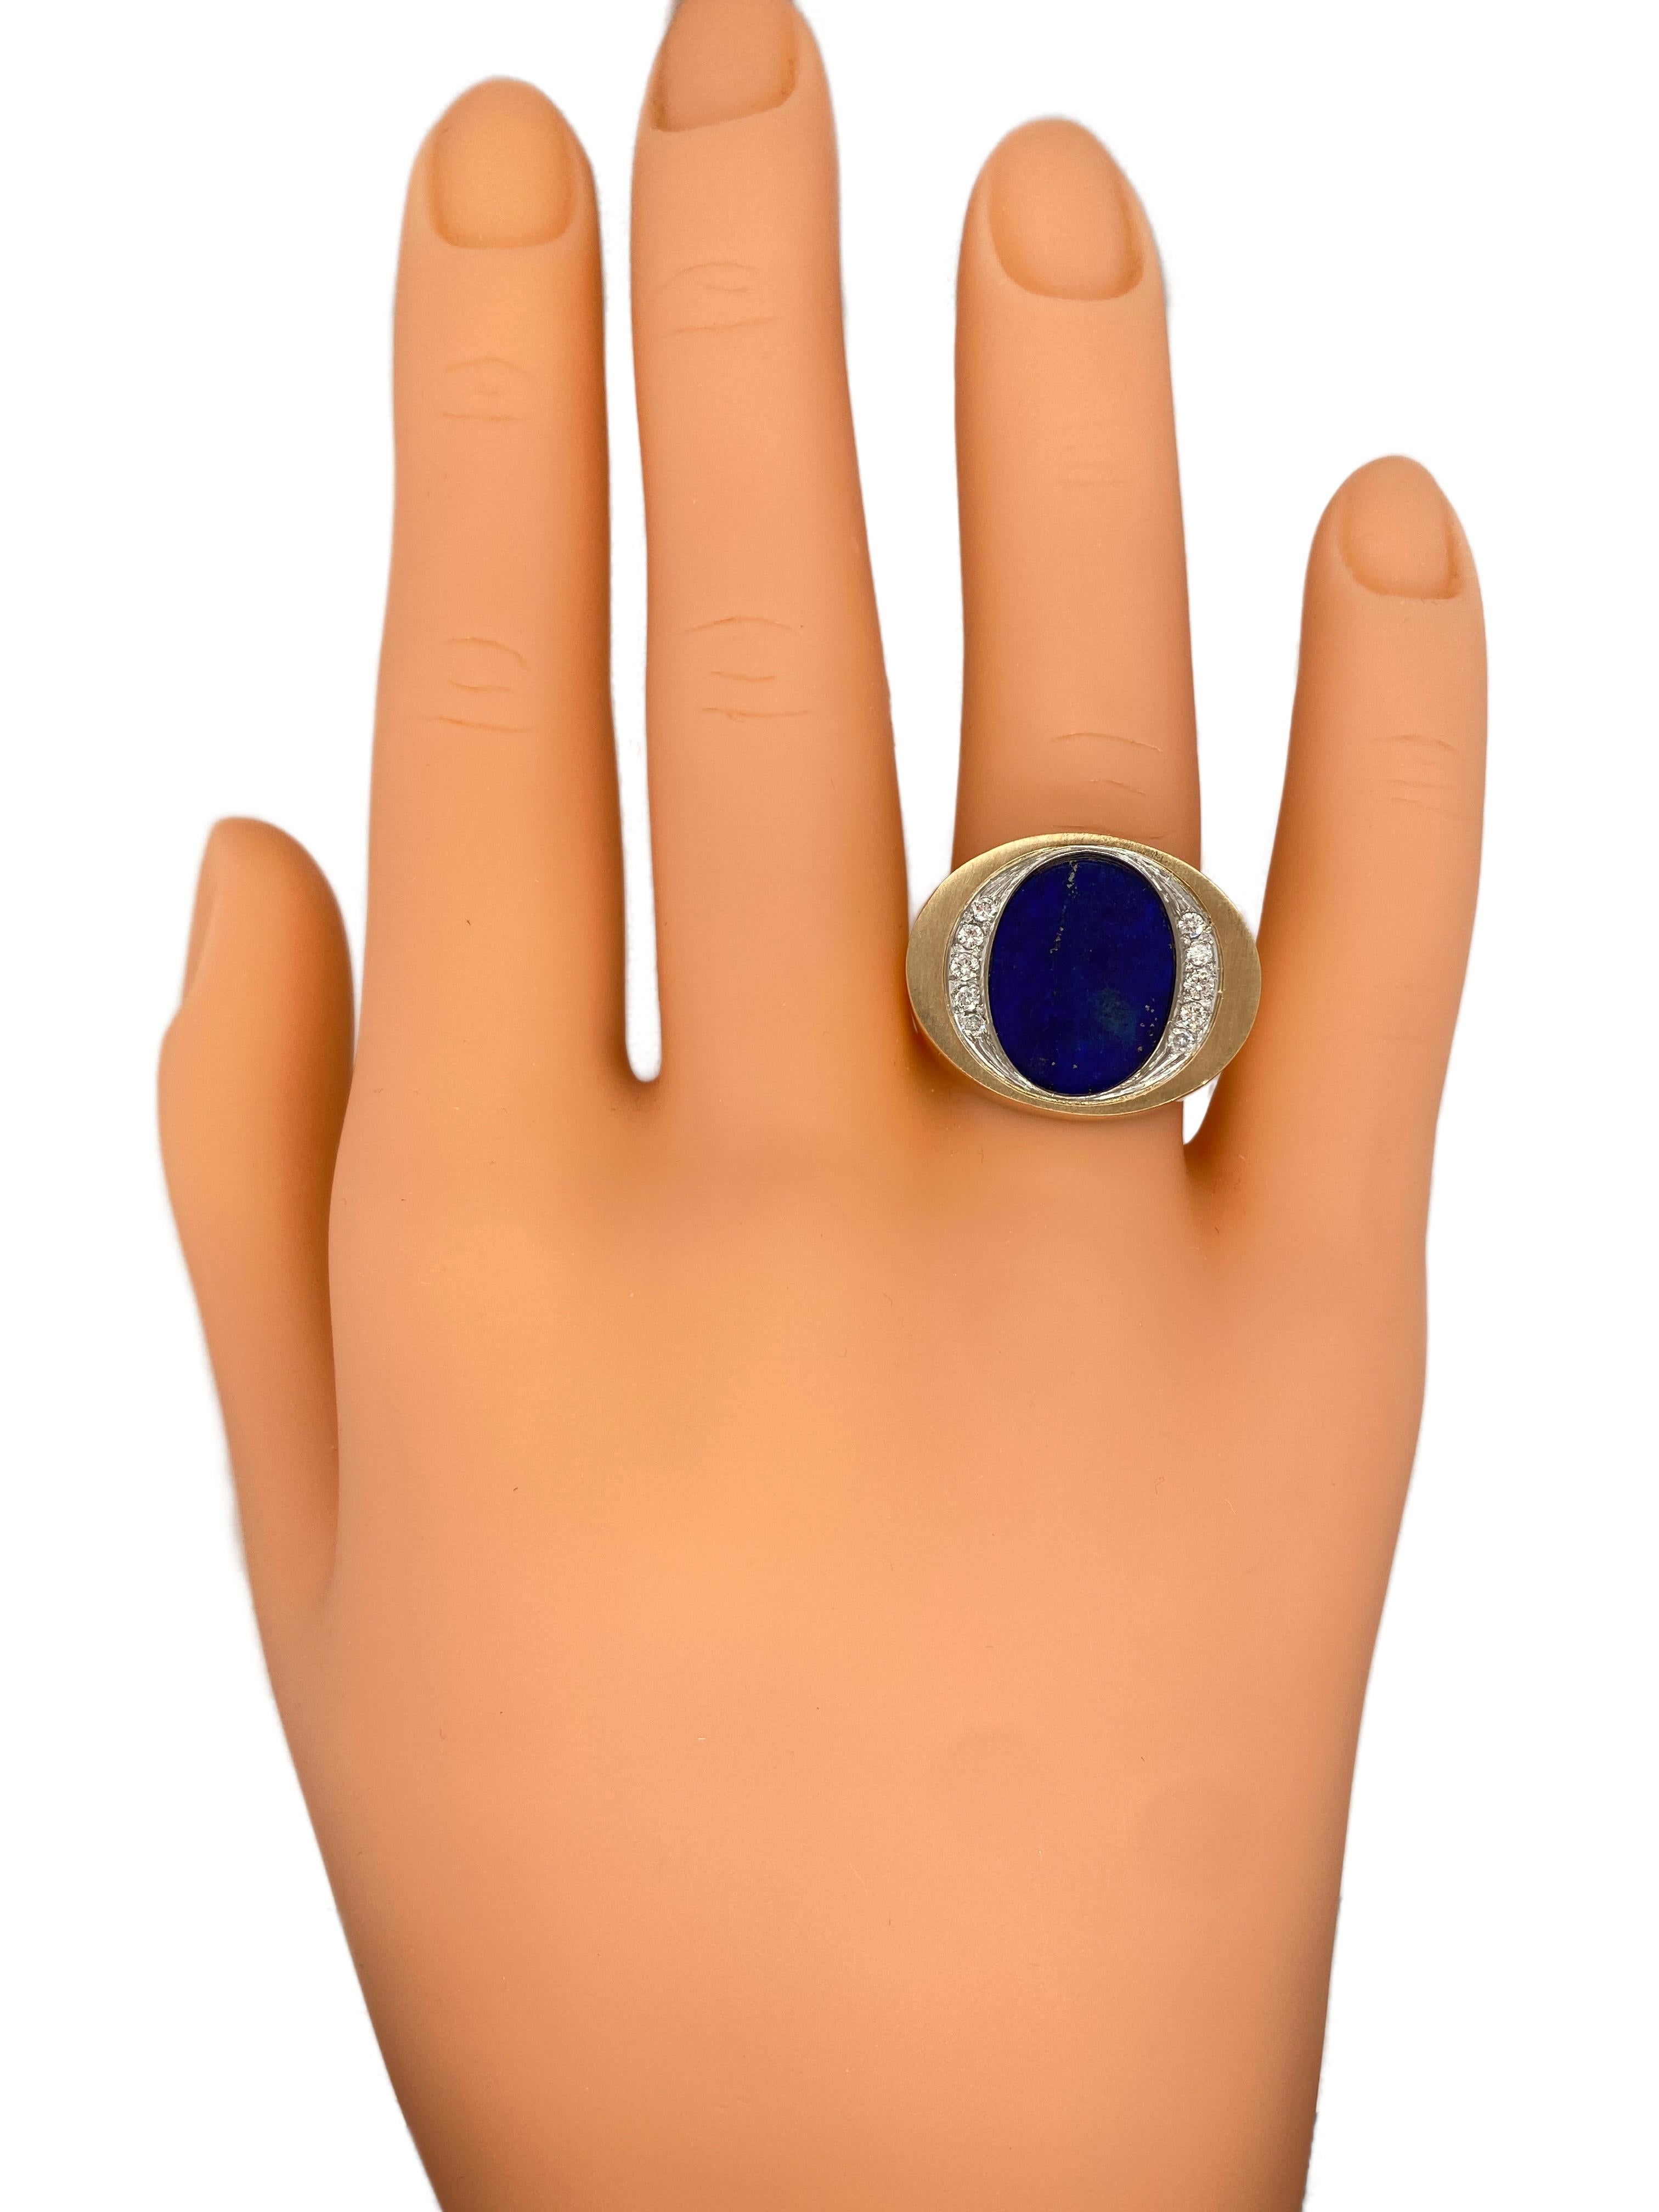 Circa 1960s Mid Century Diamond and Oval Lapis Lazuli Cocktail Ring in 14k Gold In Good Condition For Sale In Addison, TX